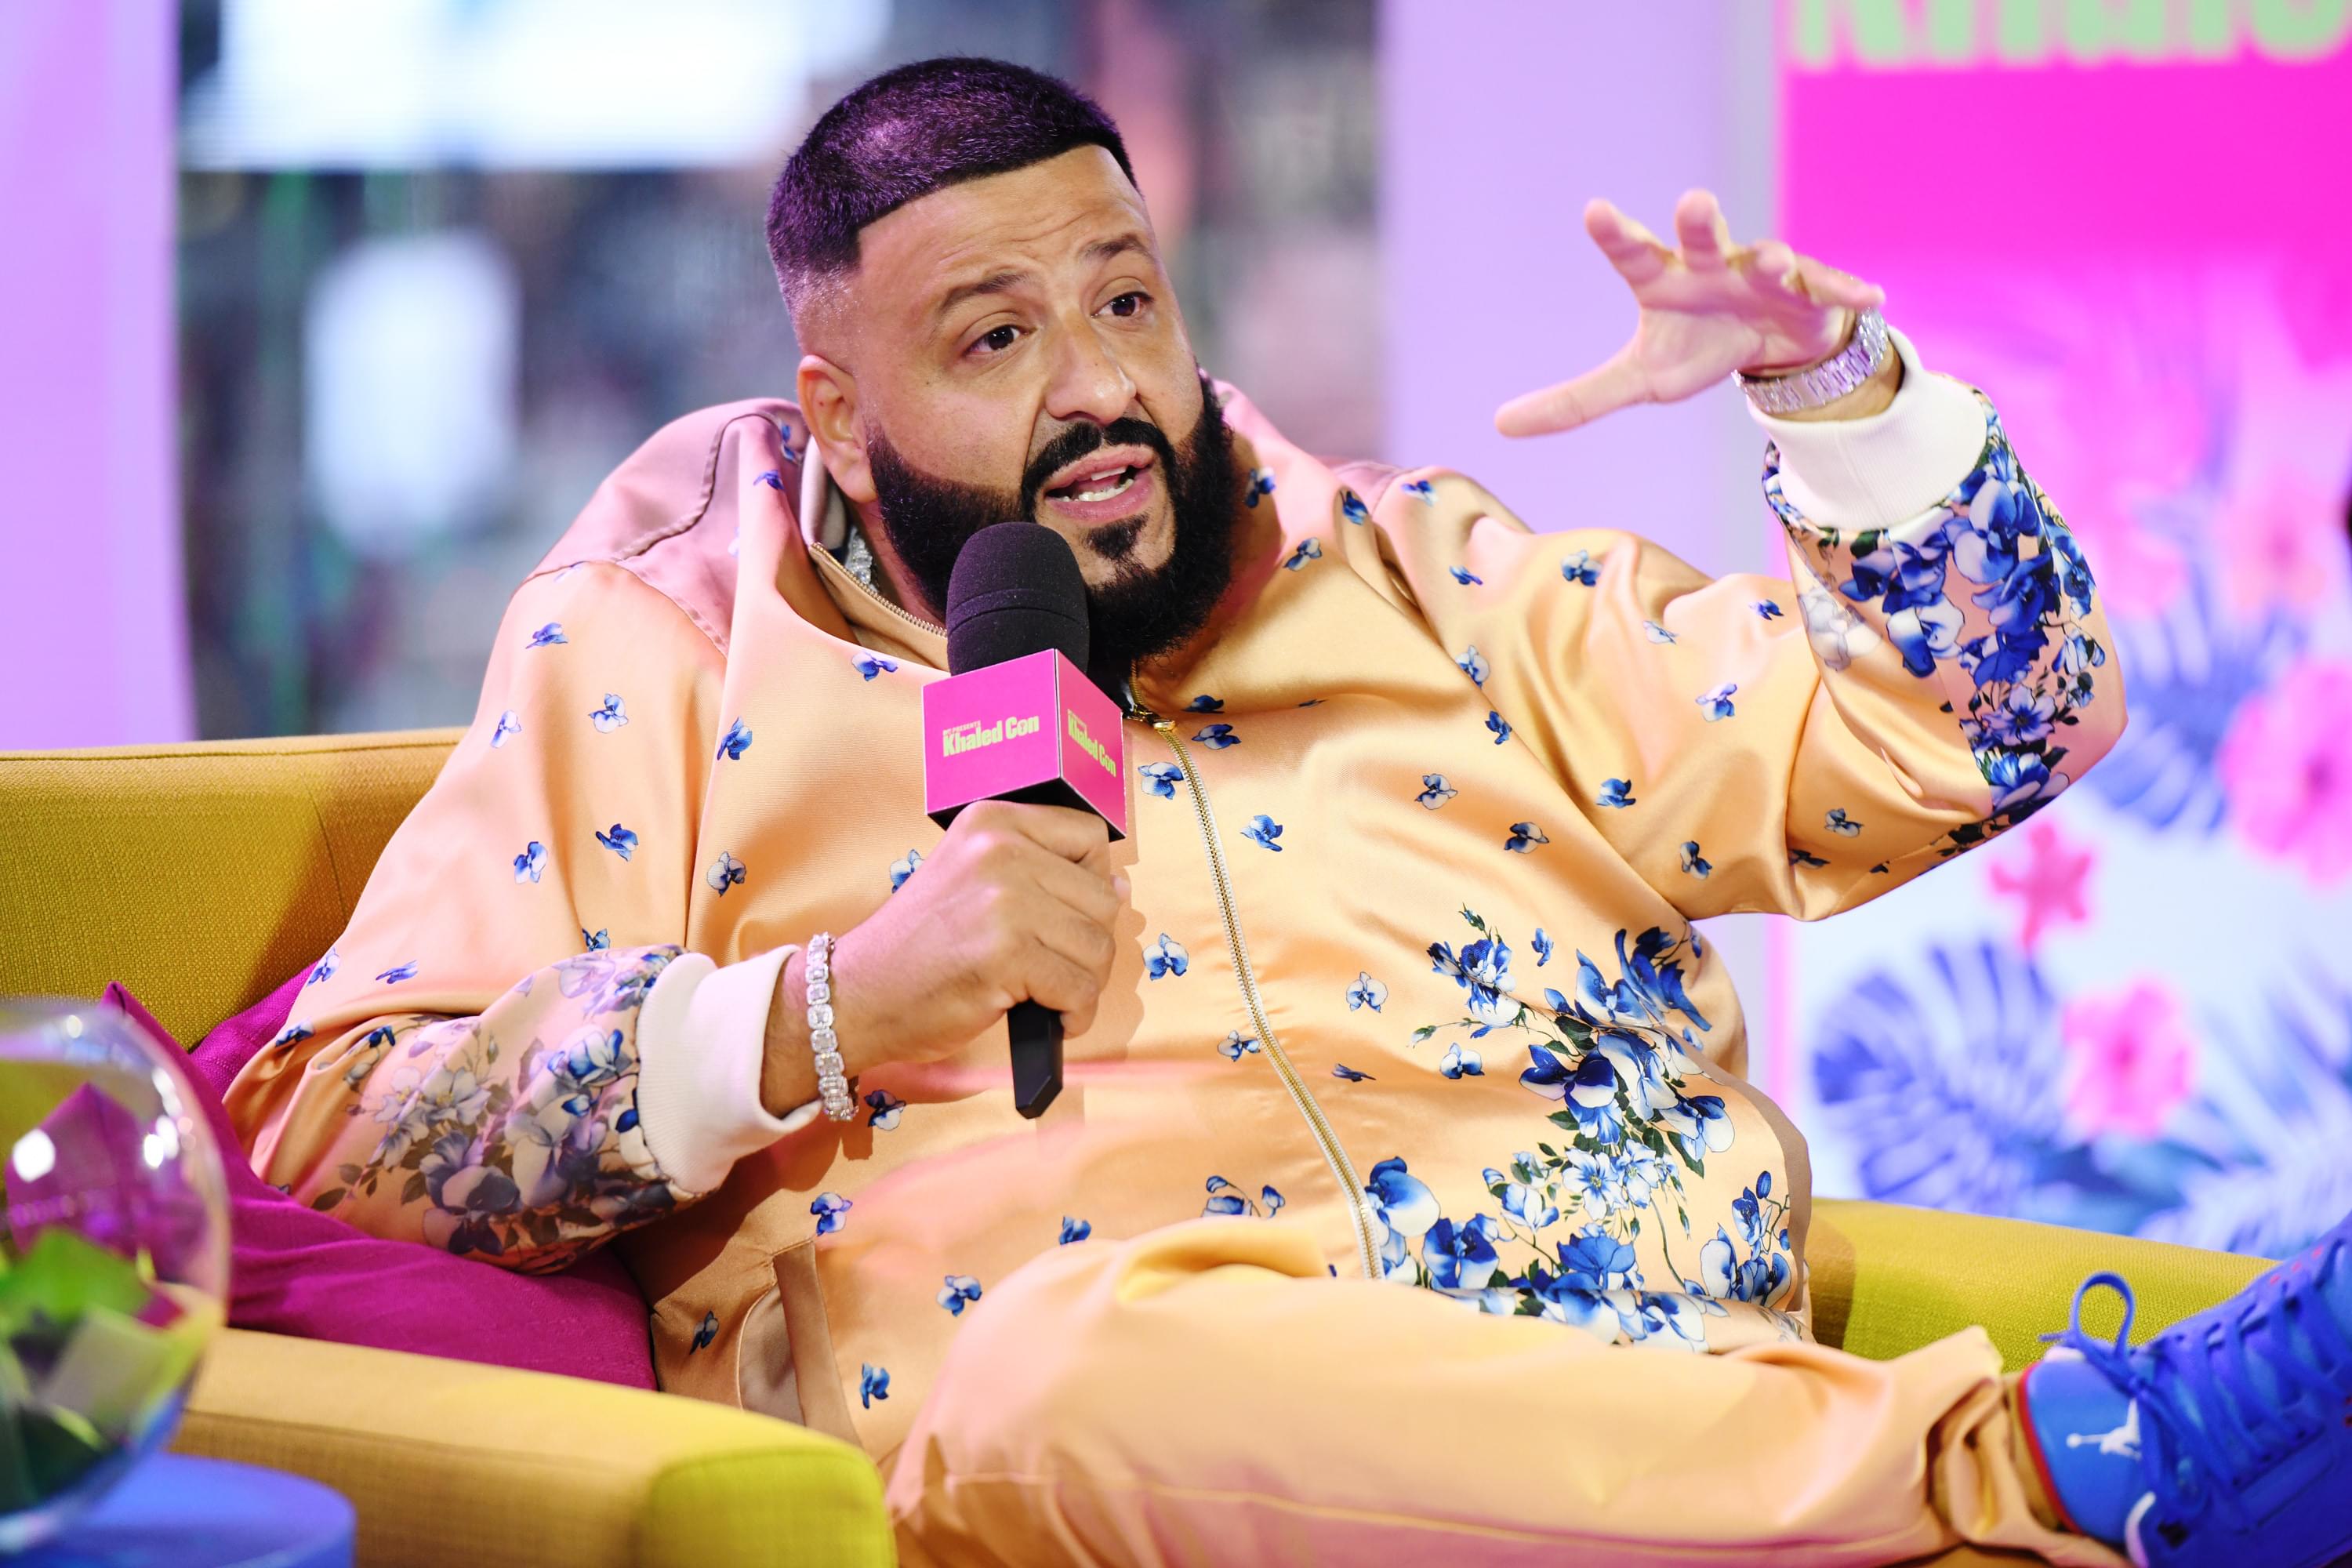 DJ Khaled Throws A Fit After Album Comes In At No. 2